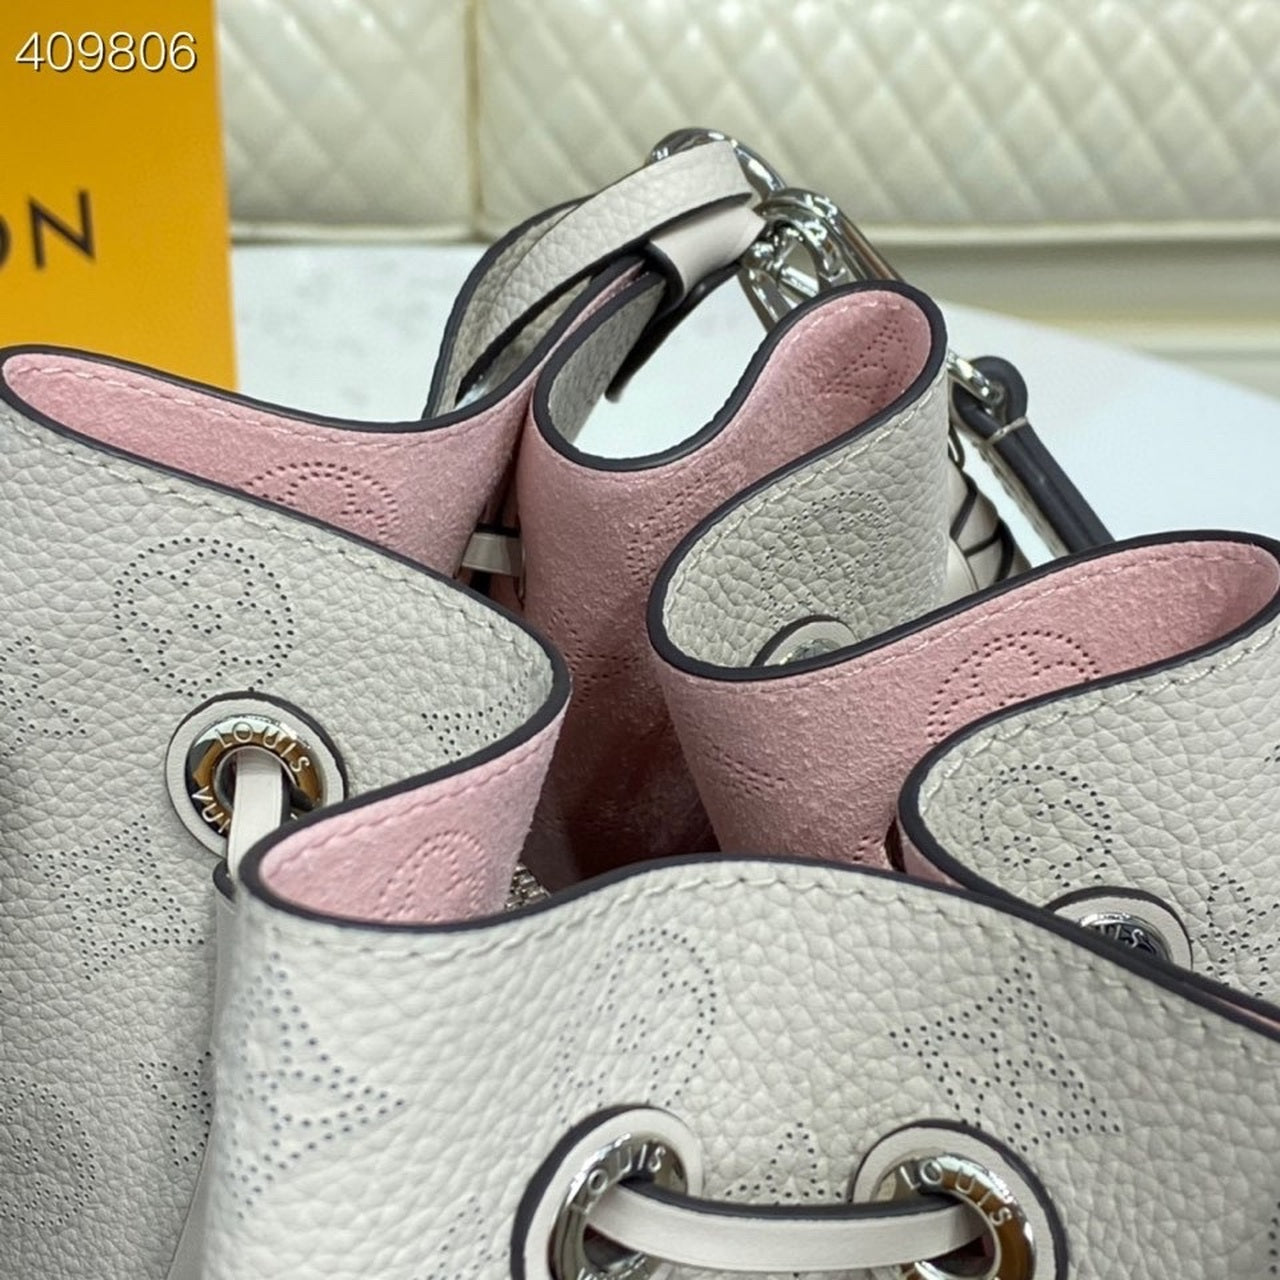 LV Muria Bucket Bag Snow White For Women,  Shoulder And Crossbody Bags 9.8in/25cm LV M58483